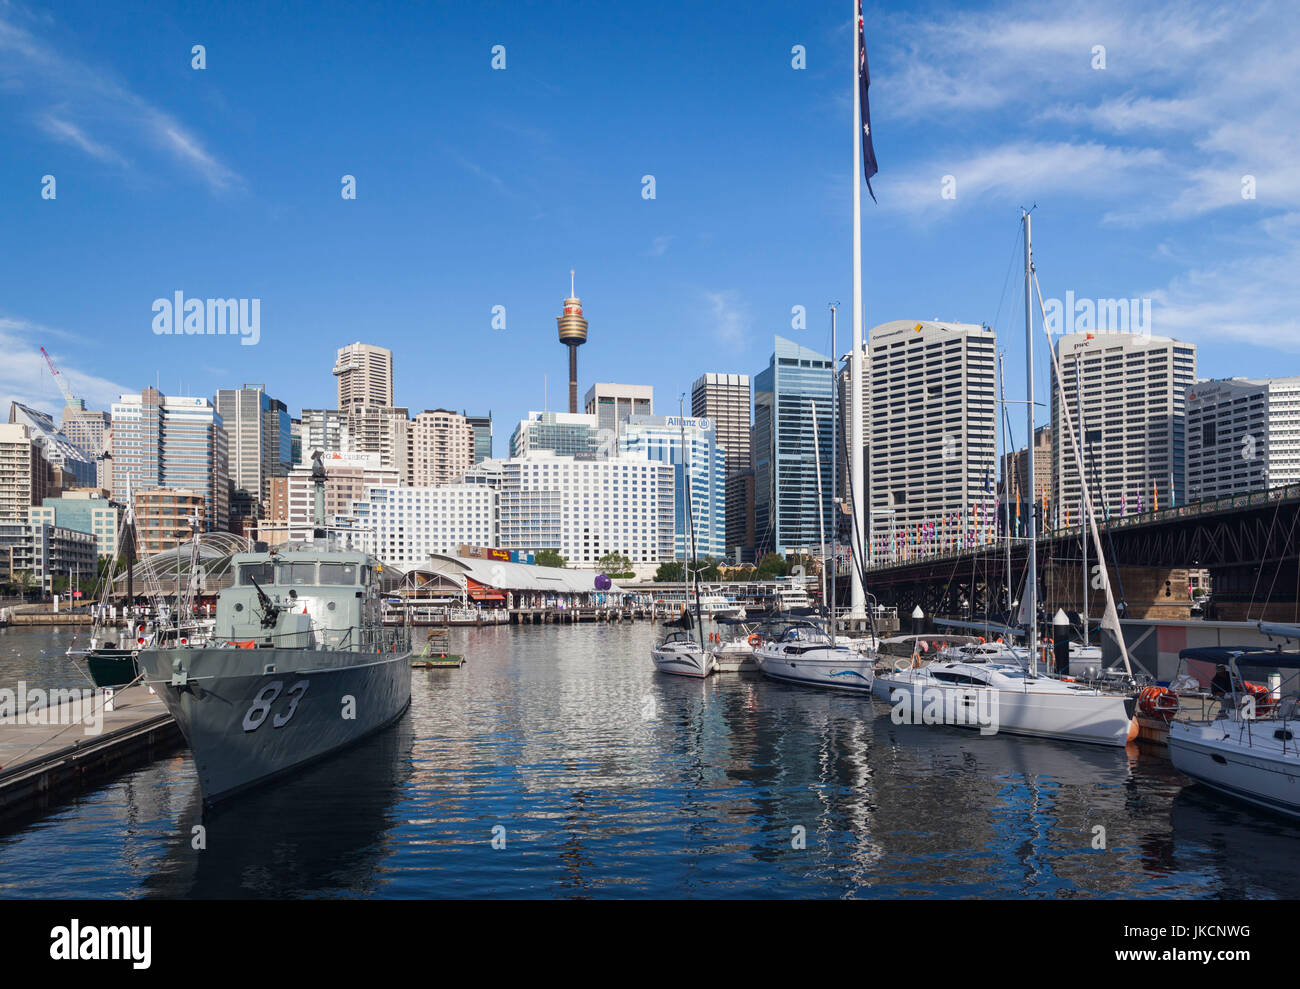 Australia, New South Wales, NSW, Sydney, Darling Harbour, Australian National Maritime Museum Stock Photo